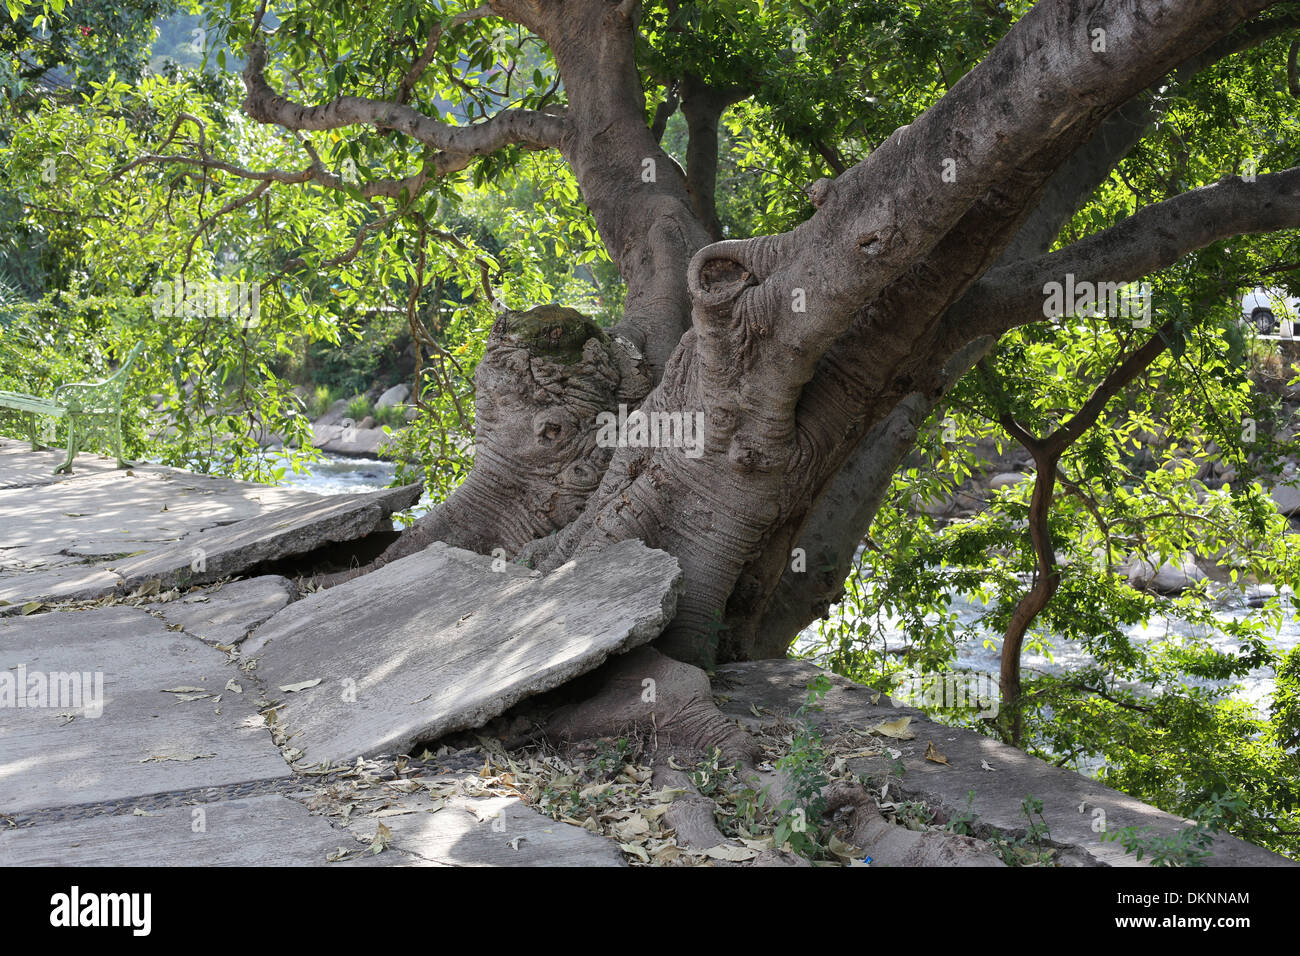 A tree growing into a sidewalk causing it to buckle and crumble, in Puerto Vallarta, Mexico. Stock Photo